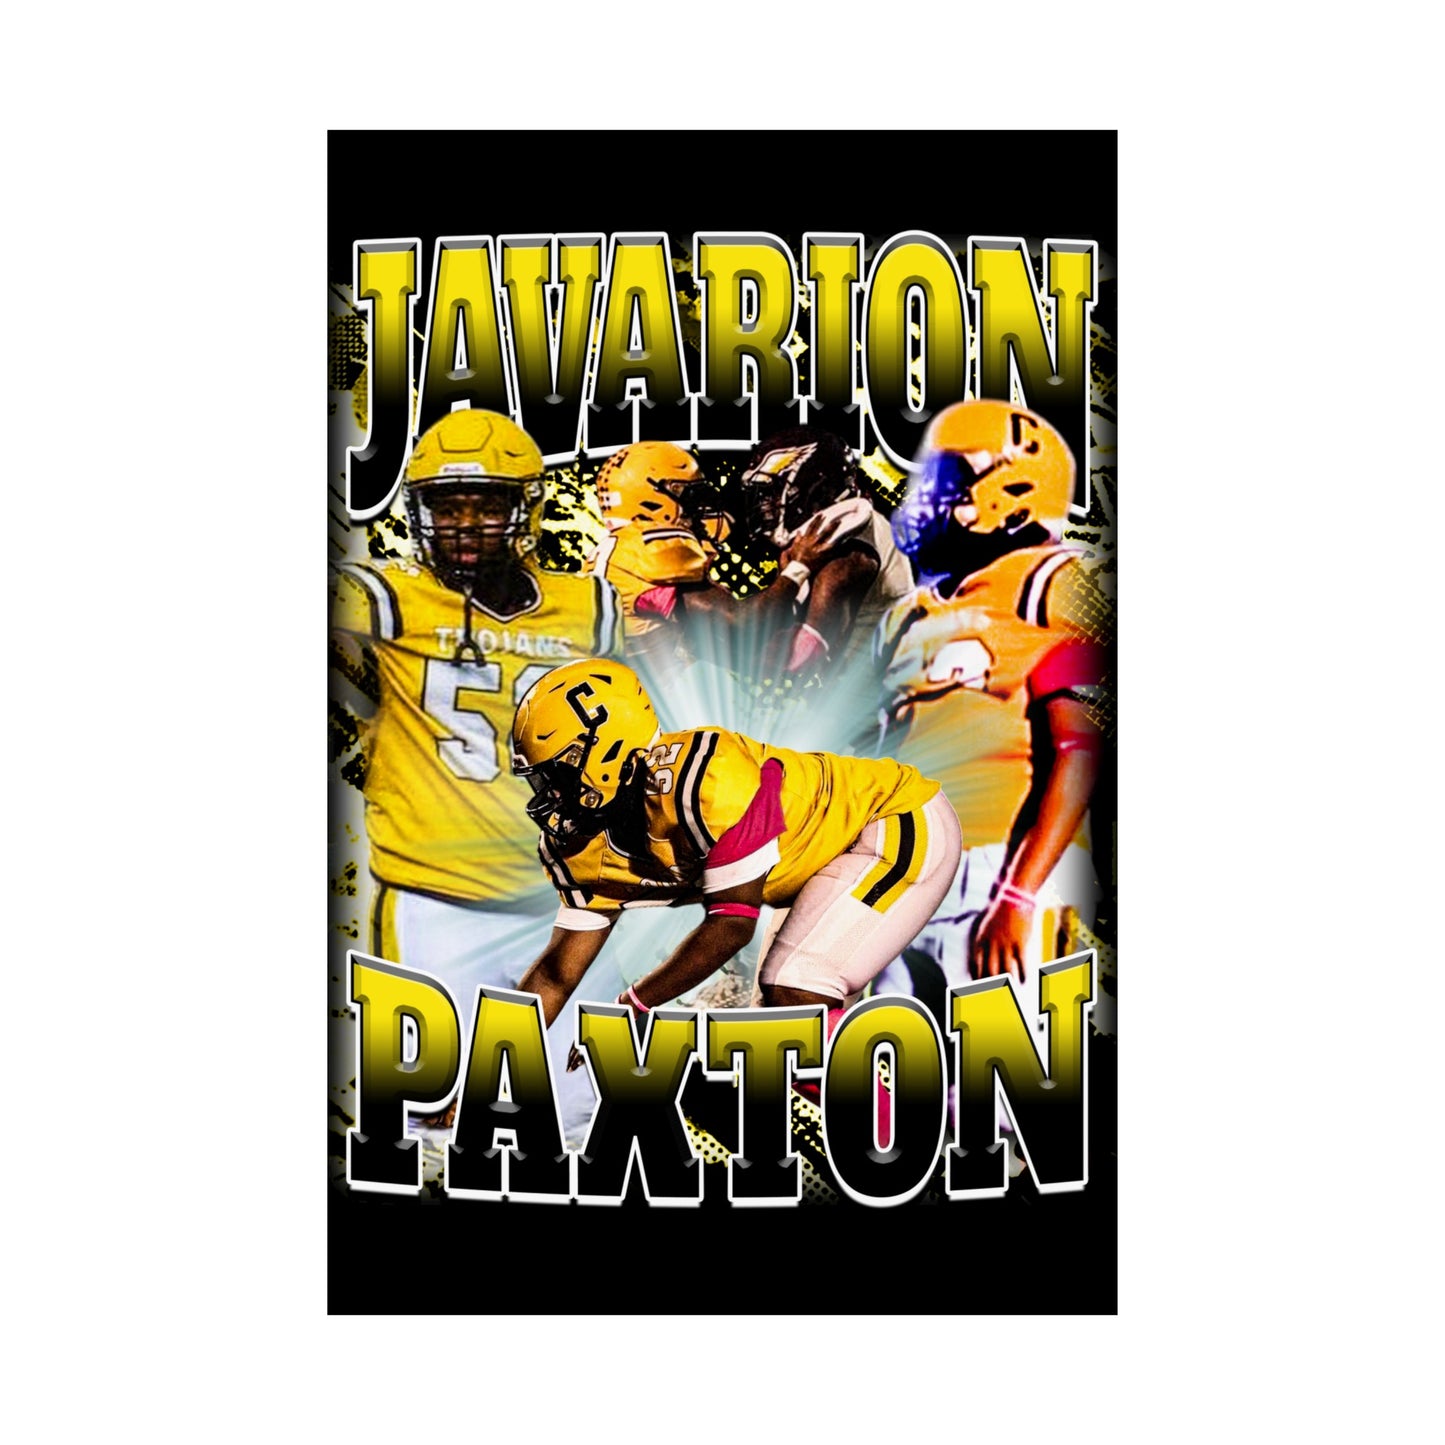 Javarion Paxton Poster 24" x 36"